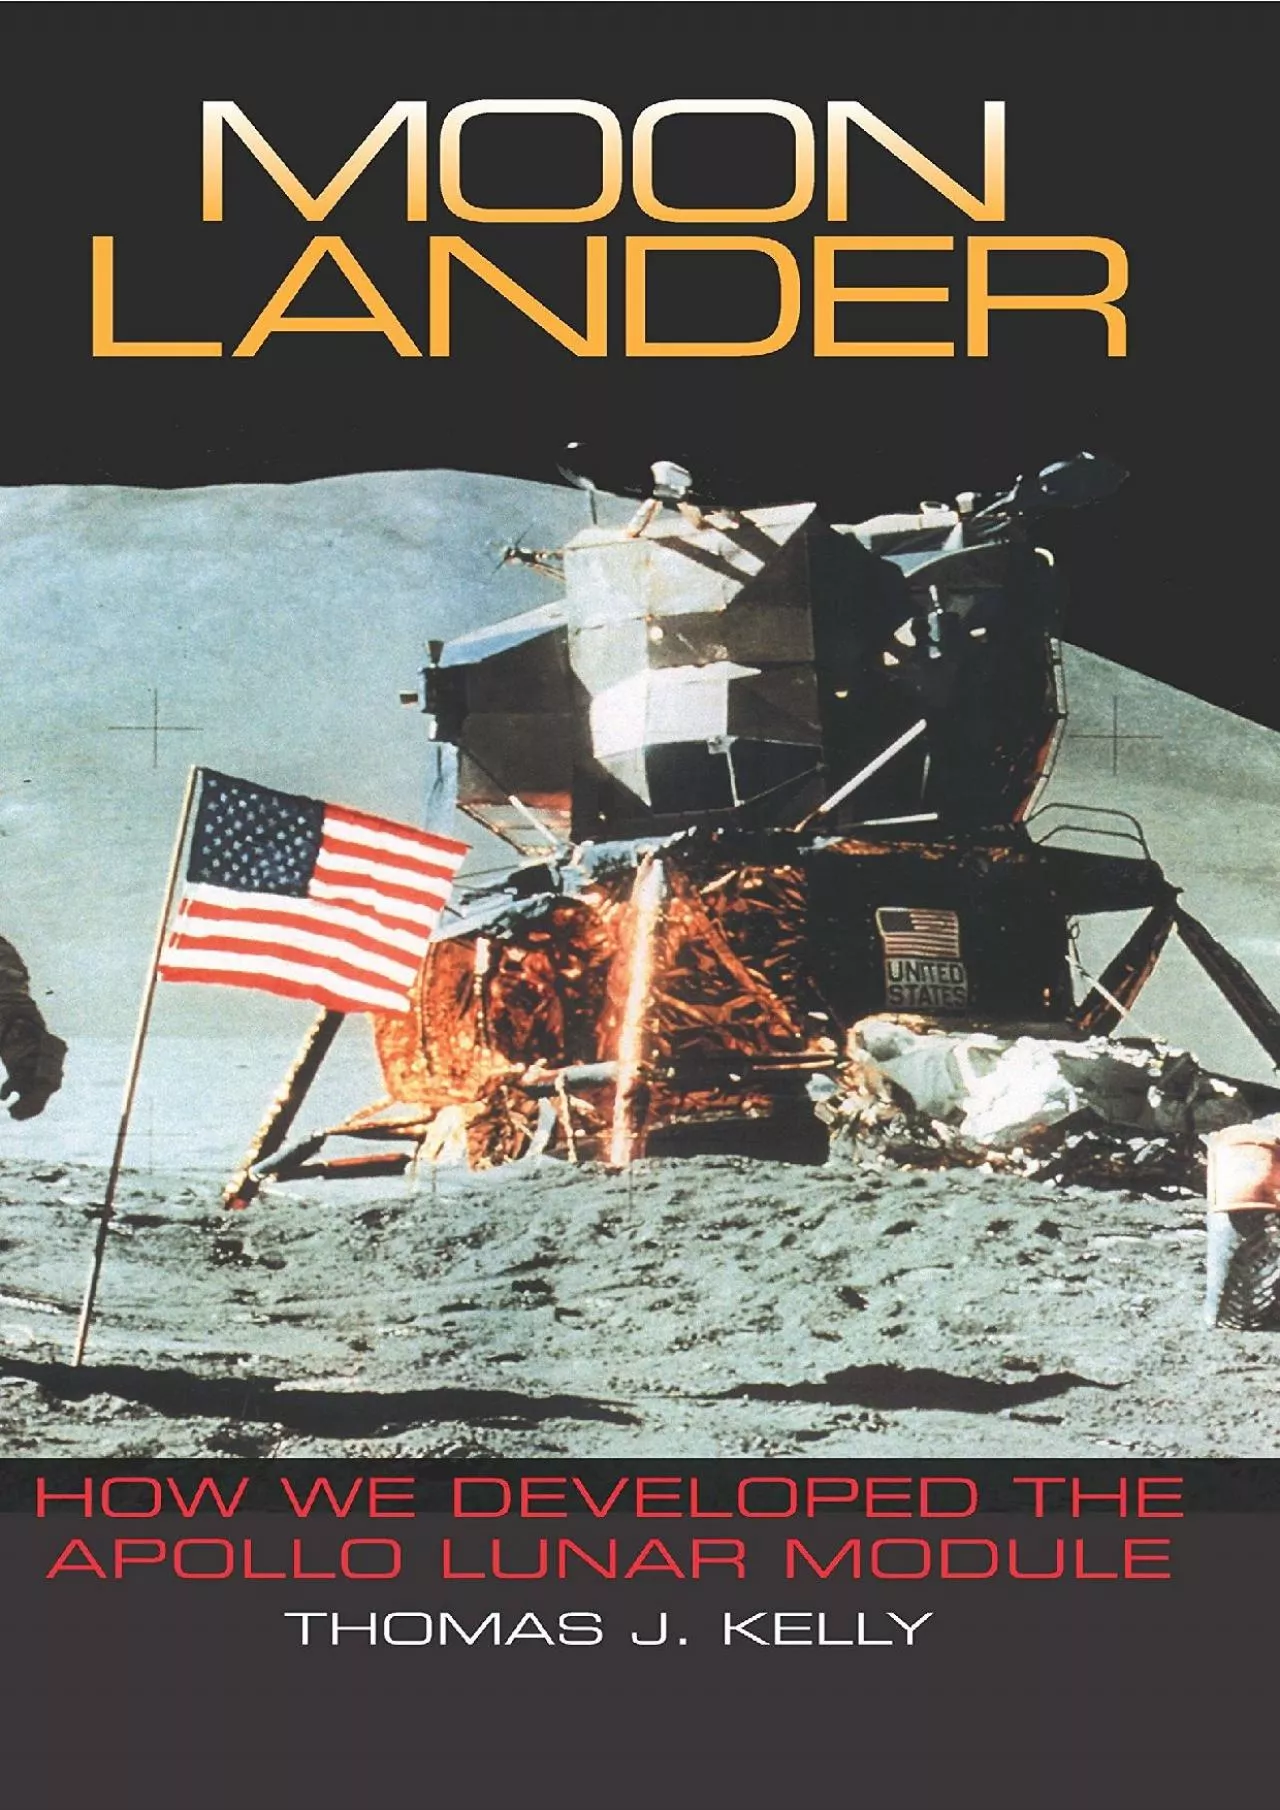 [DOWNLOAD]-Moon Lander: How We Developed the Apollo Lunar Module (Smithsonian History